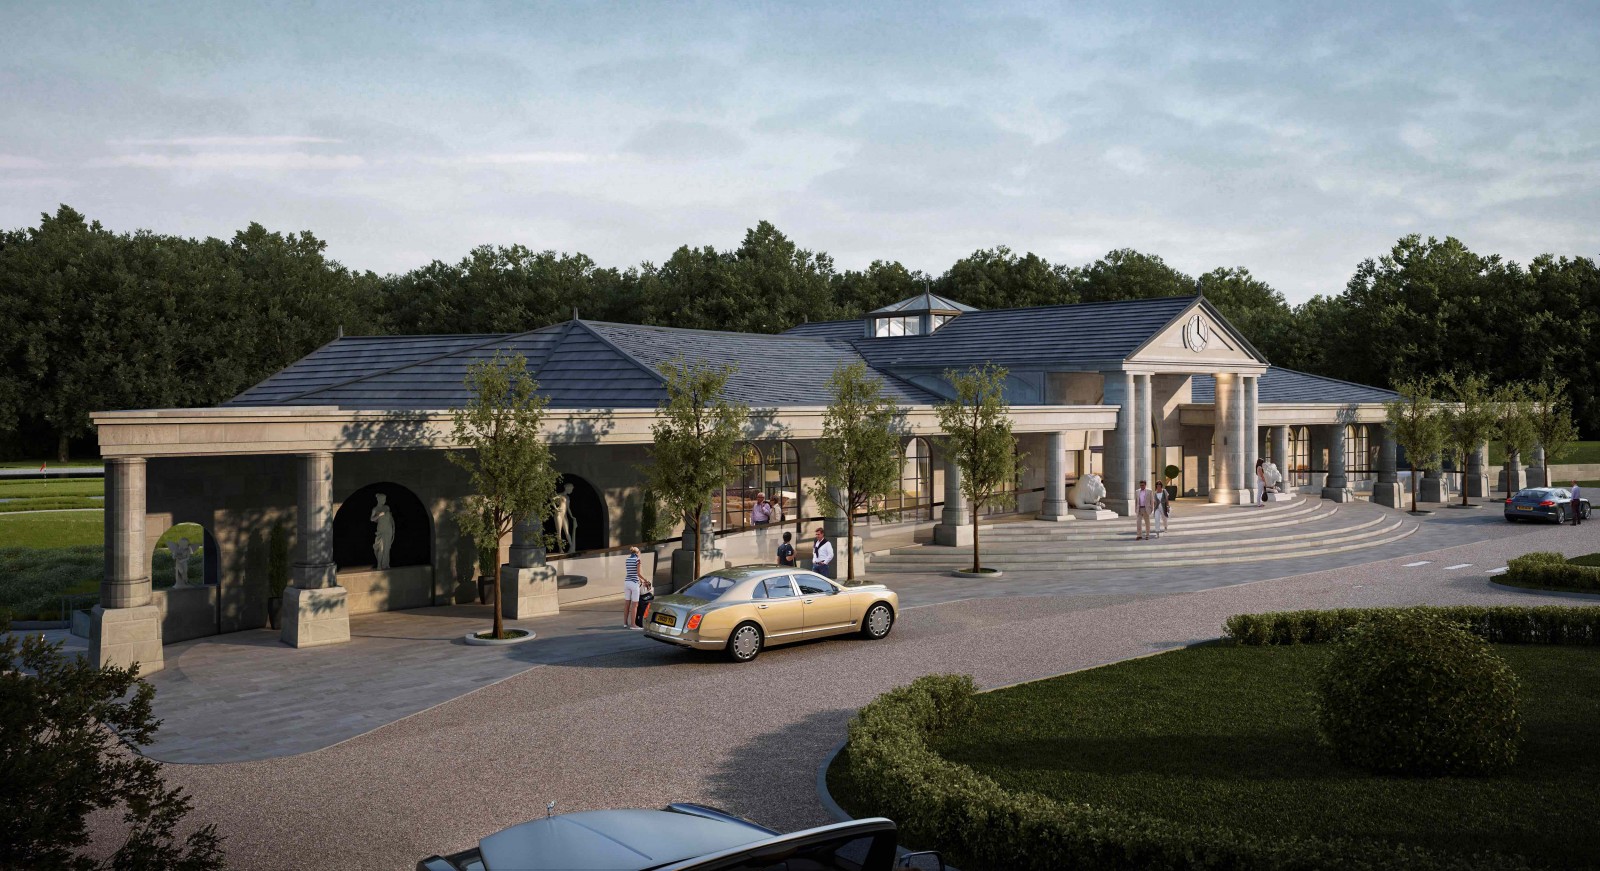 An artist's impression of the proposed clubhouse